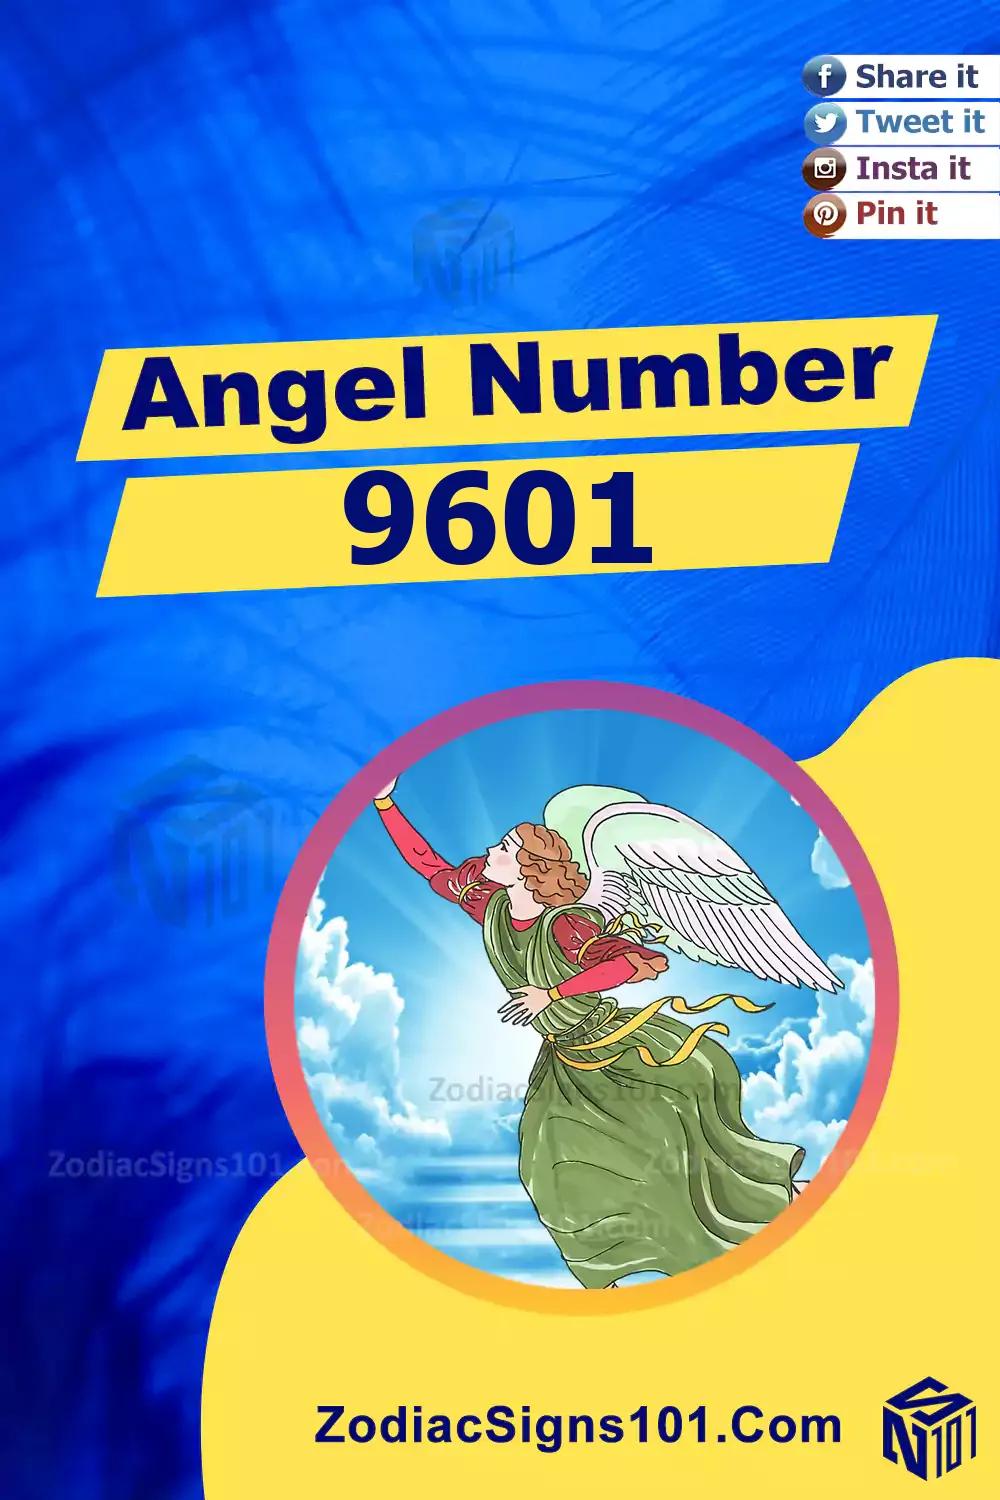 9601 Angel Number Meaning